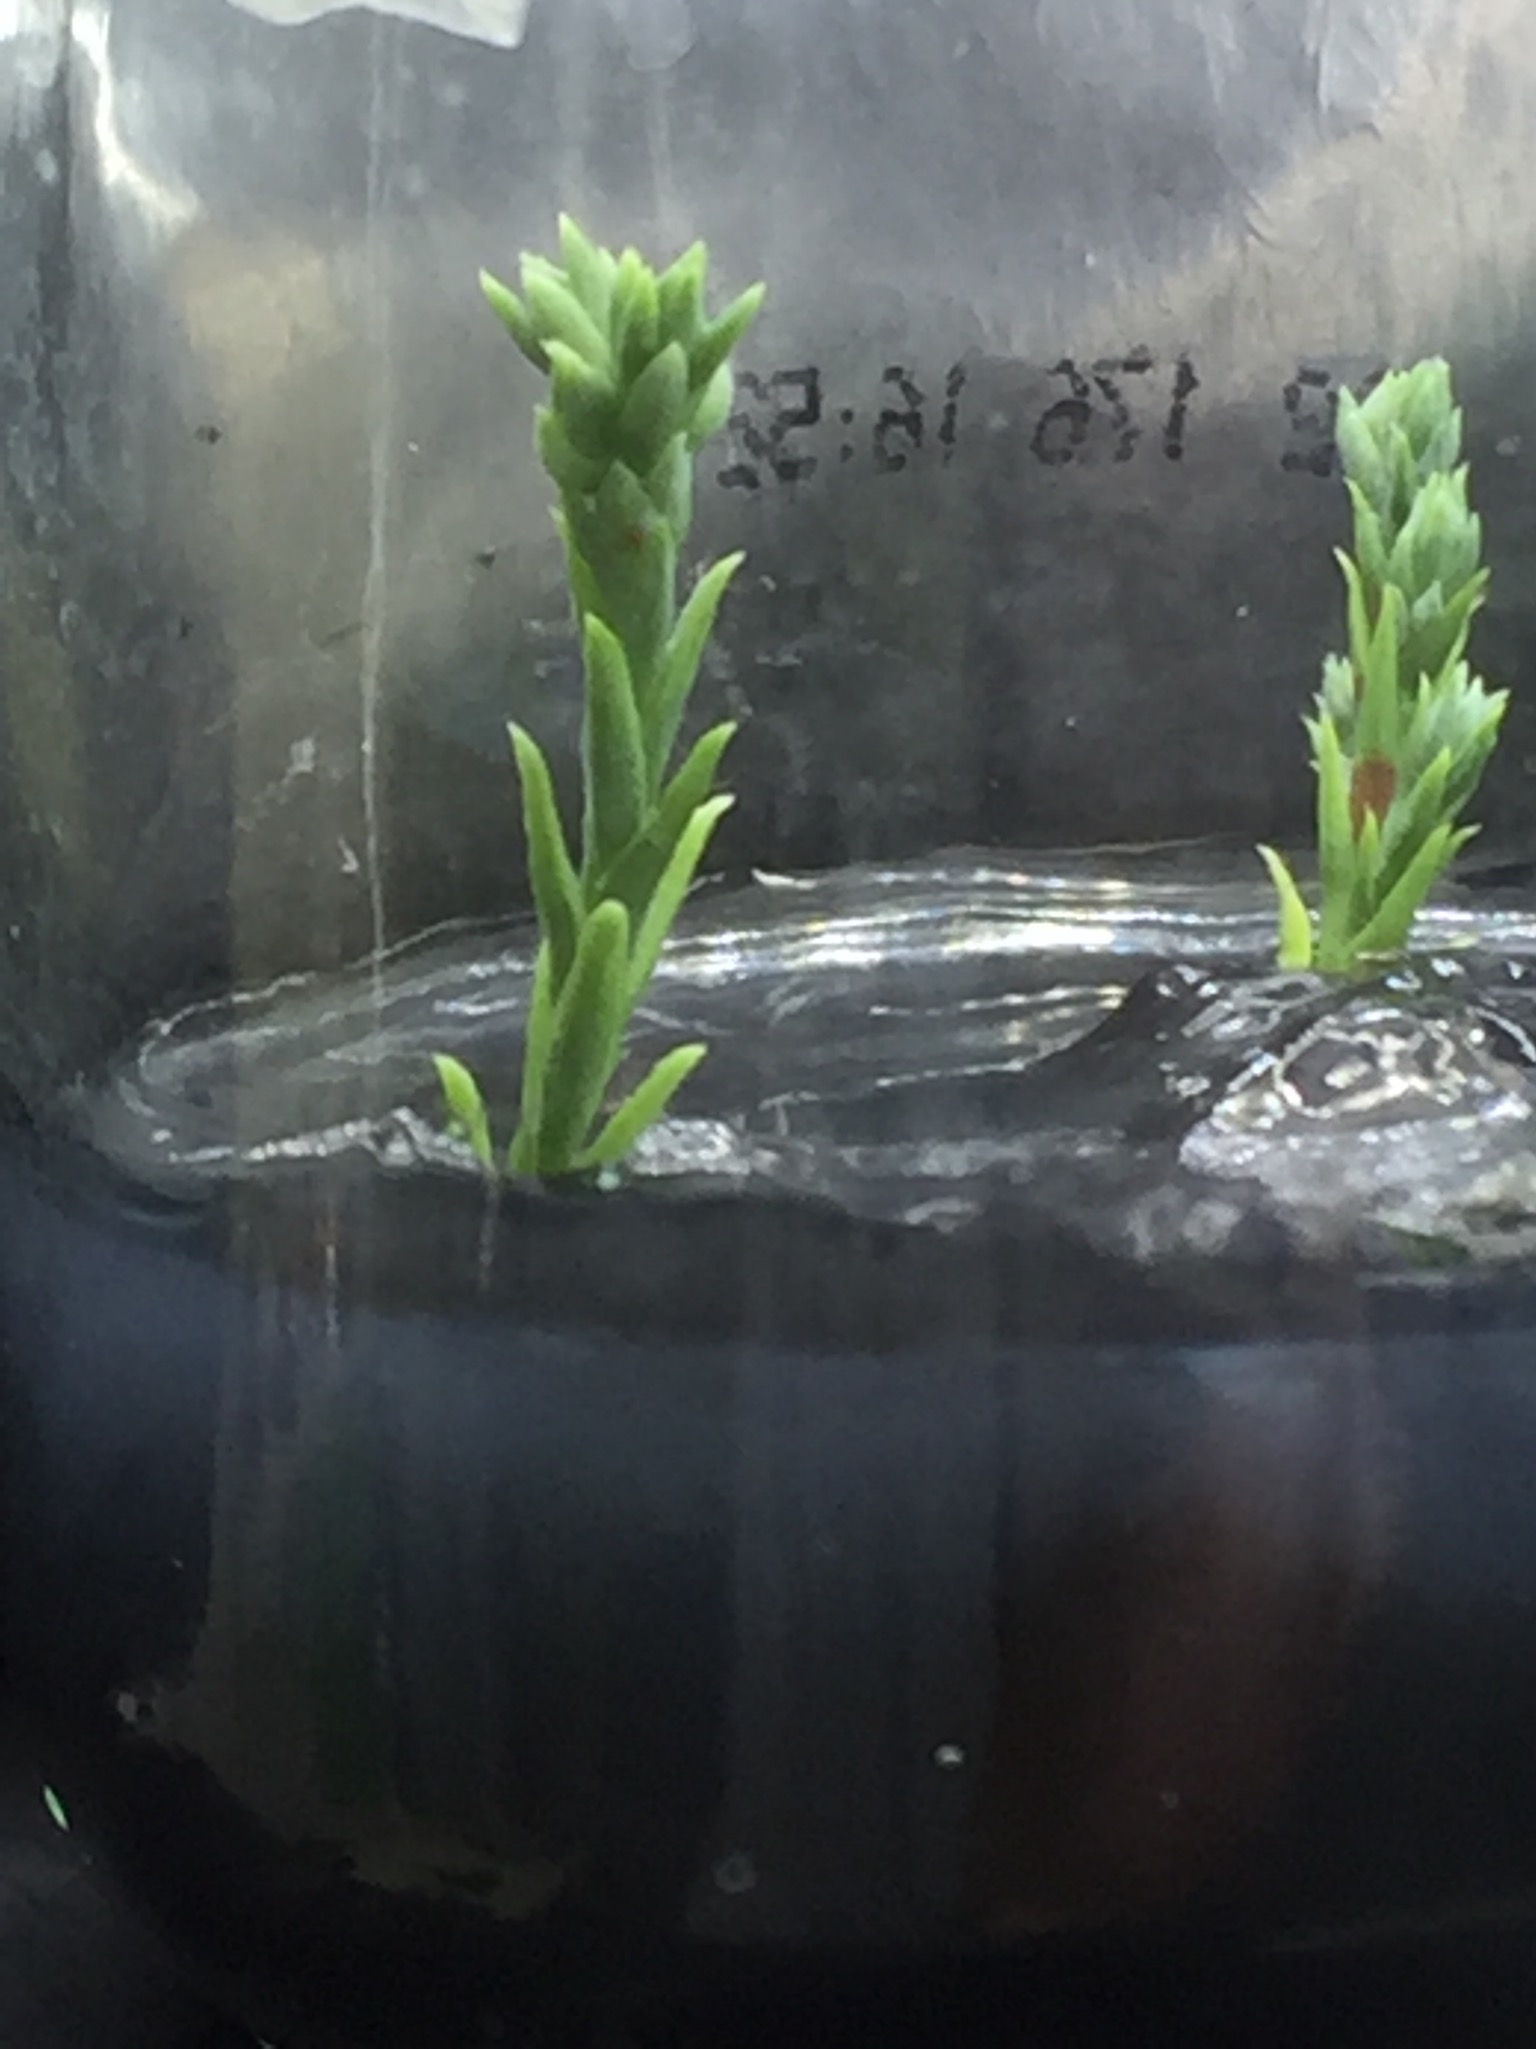 45. For tissue culture, we like to use the newest, freshest growth tips.